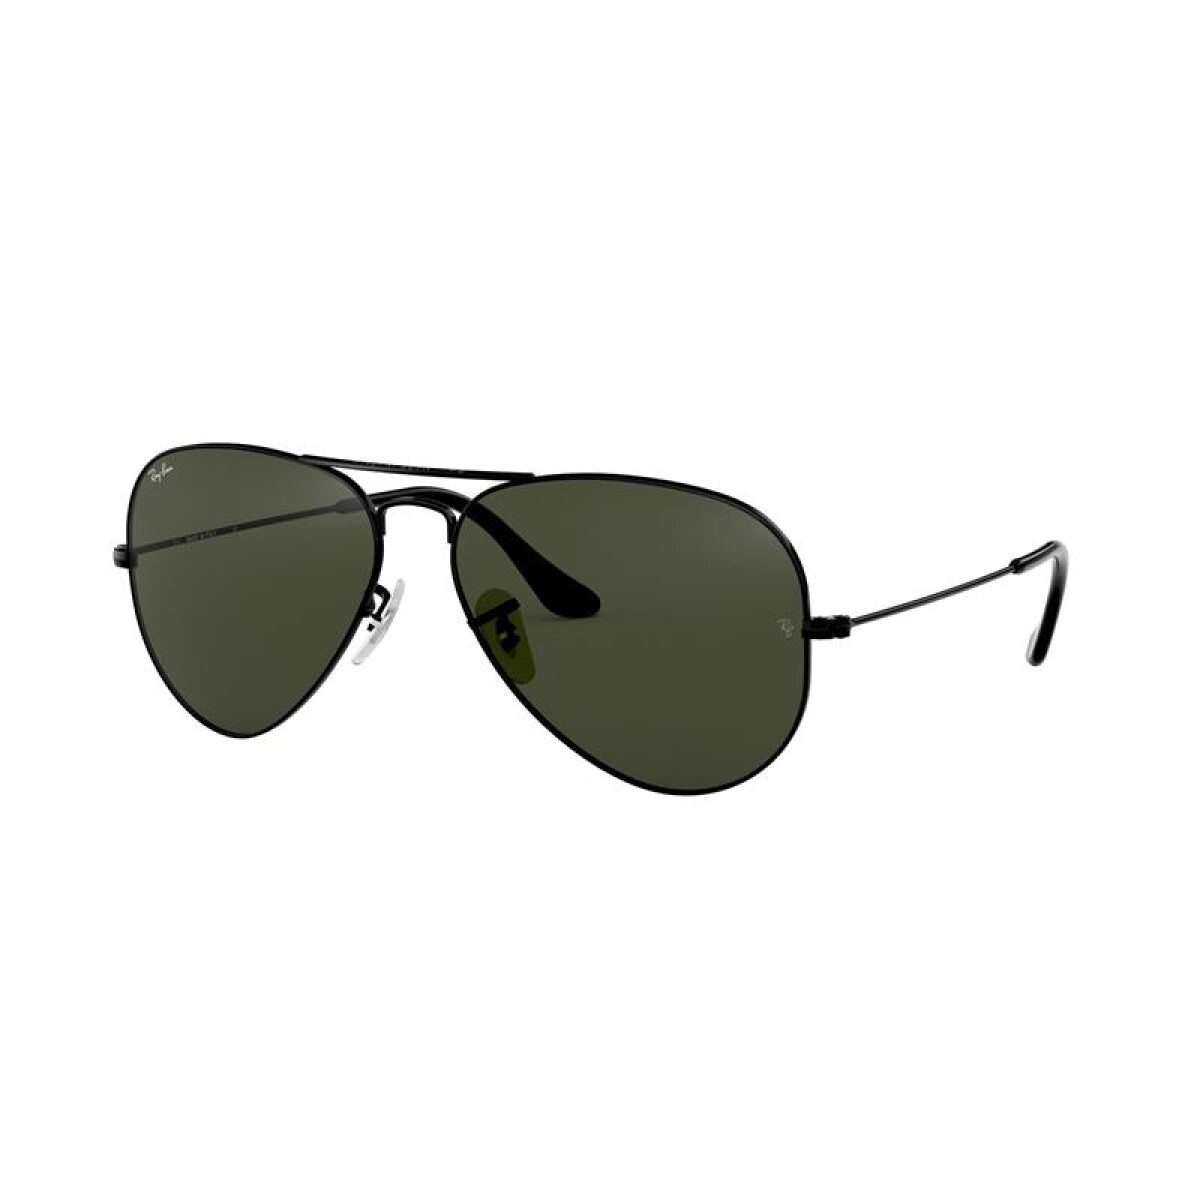 Ray Ban Rb3025 - L2823 